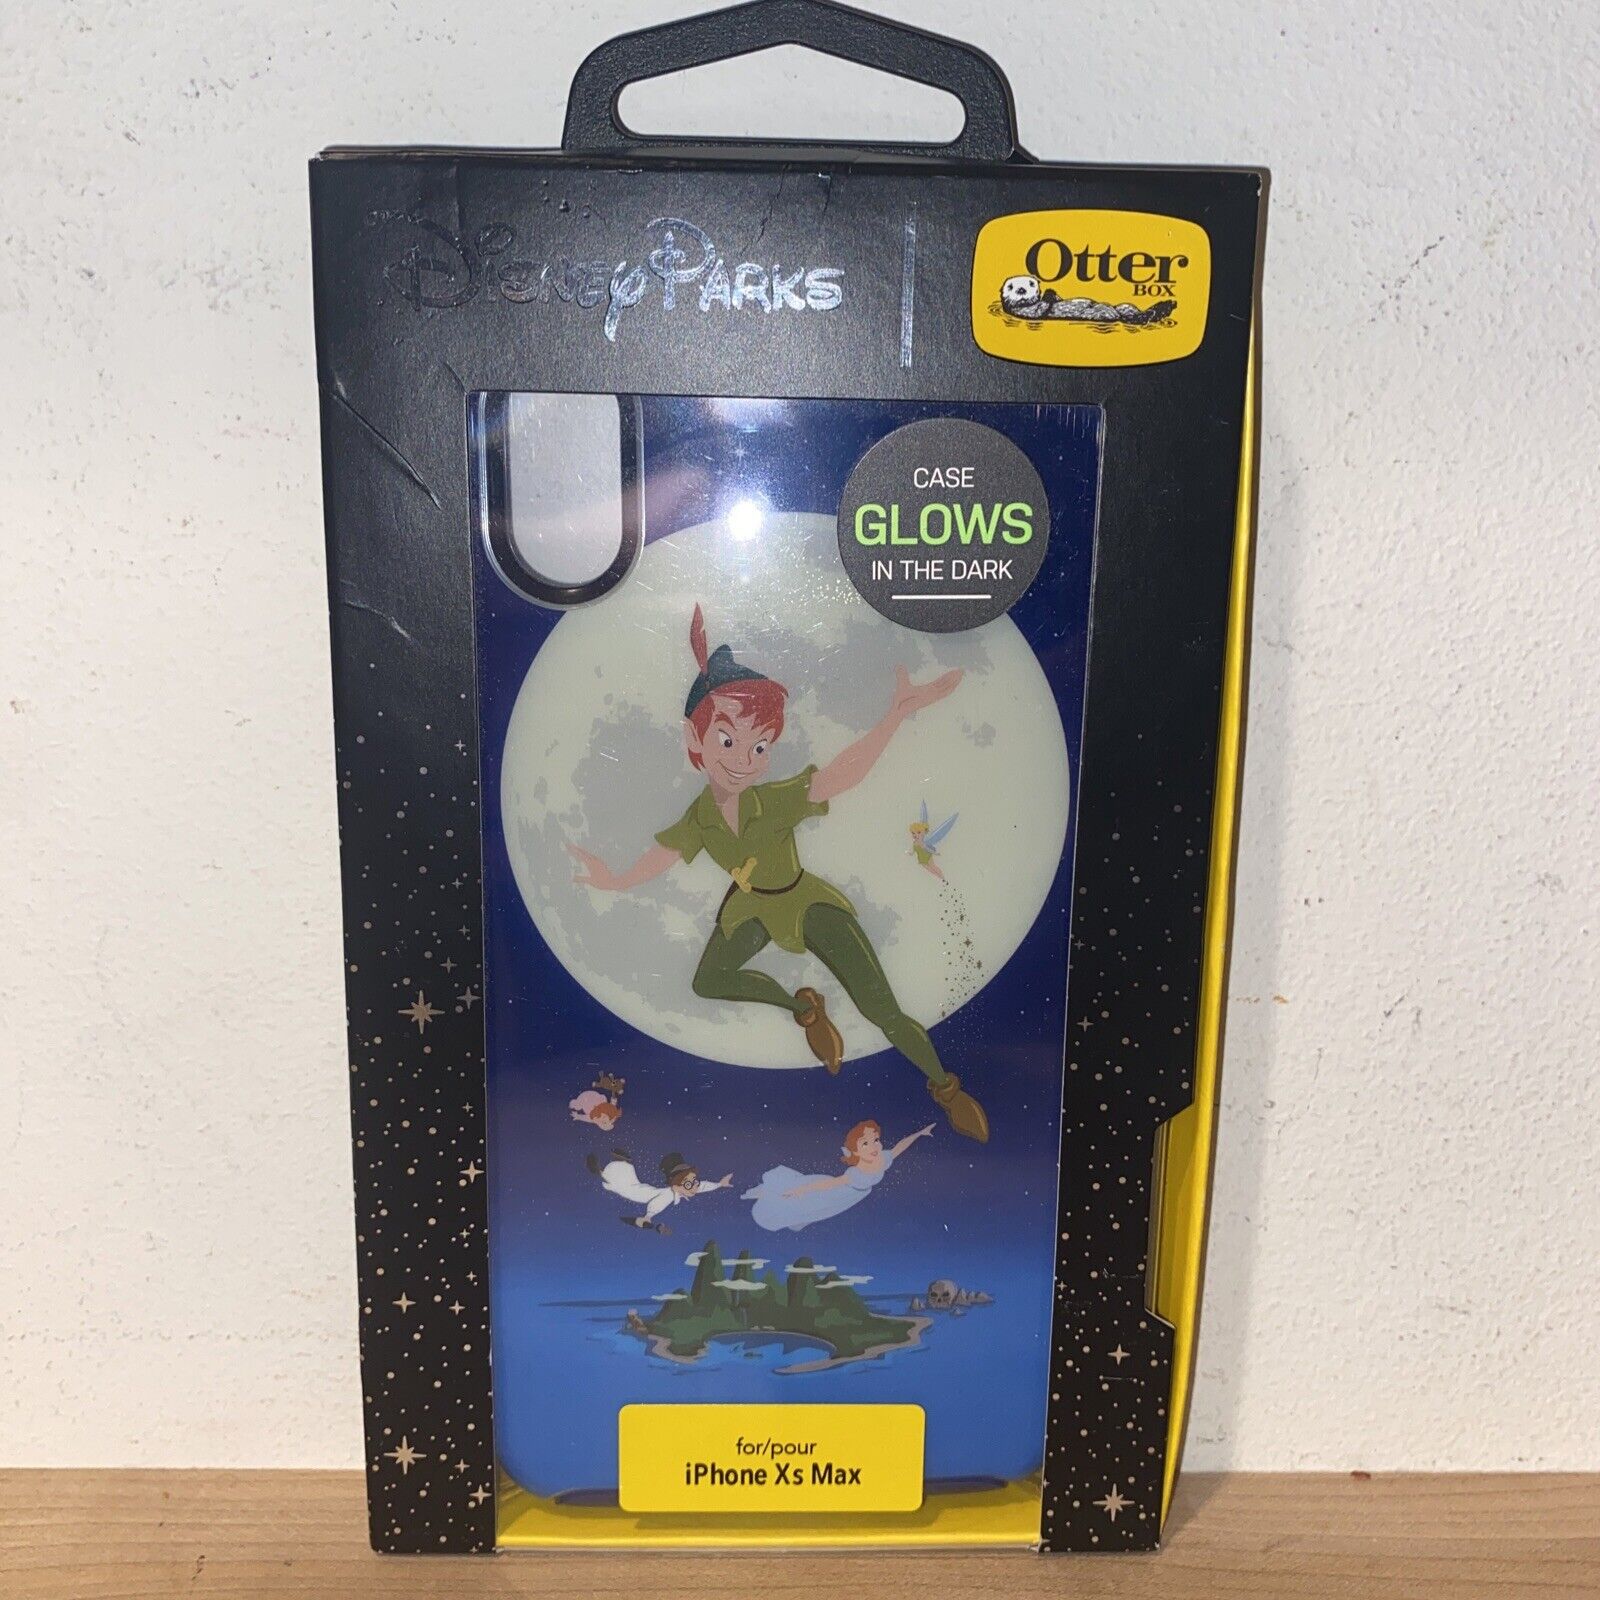 NEW OTTERBOX Disney Parks XS MAX iPhone Case Peter Pan Tinker Bell Glows in Dark